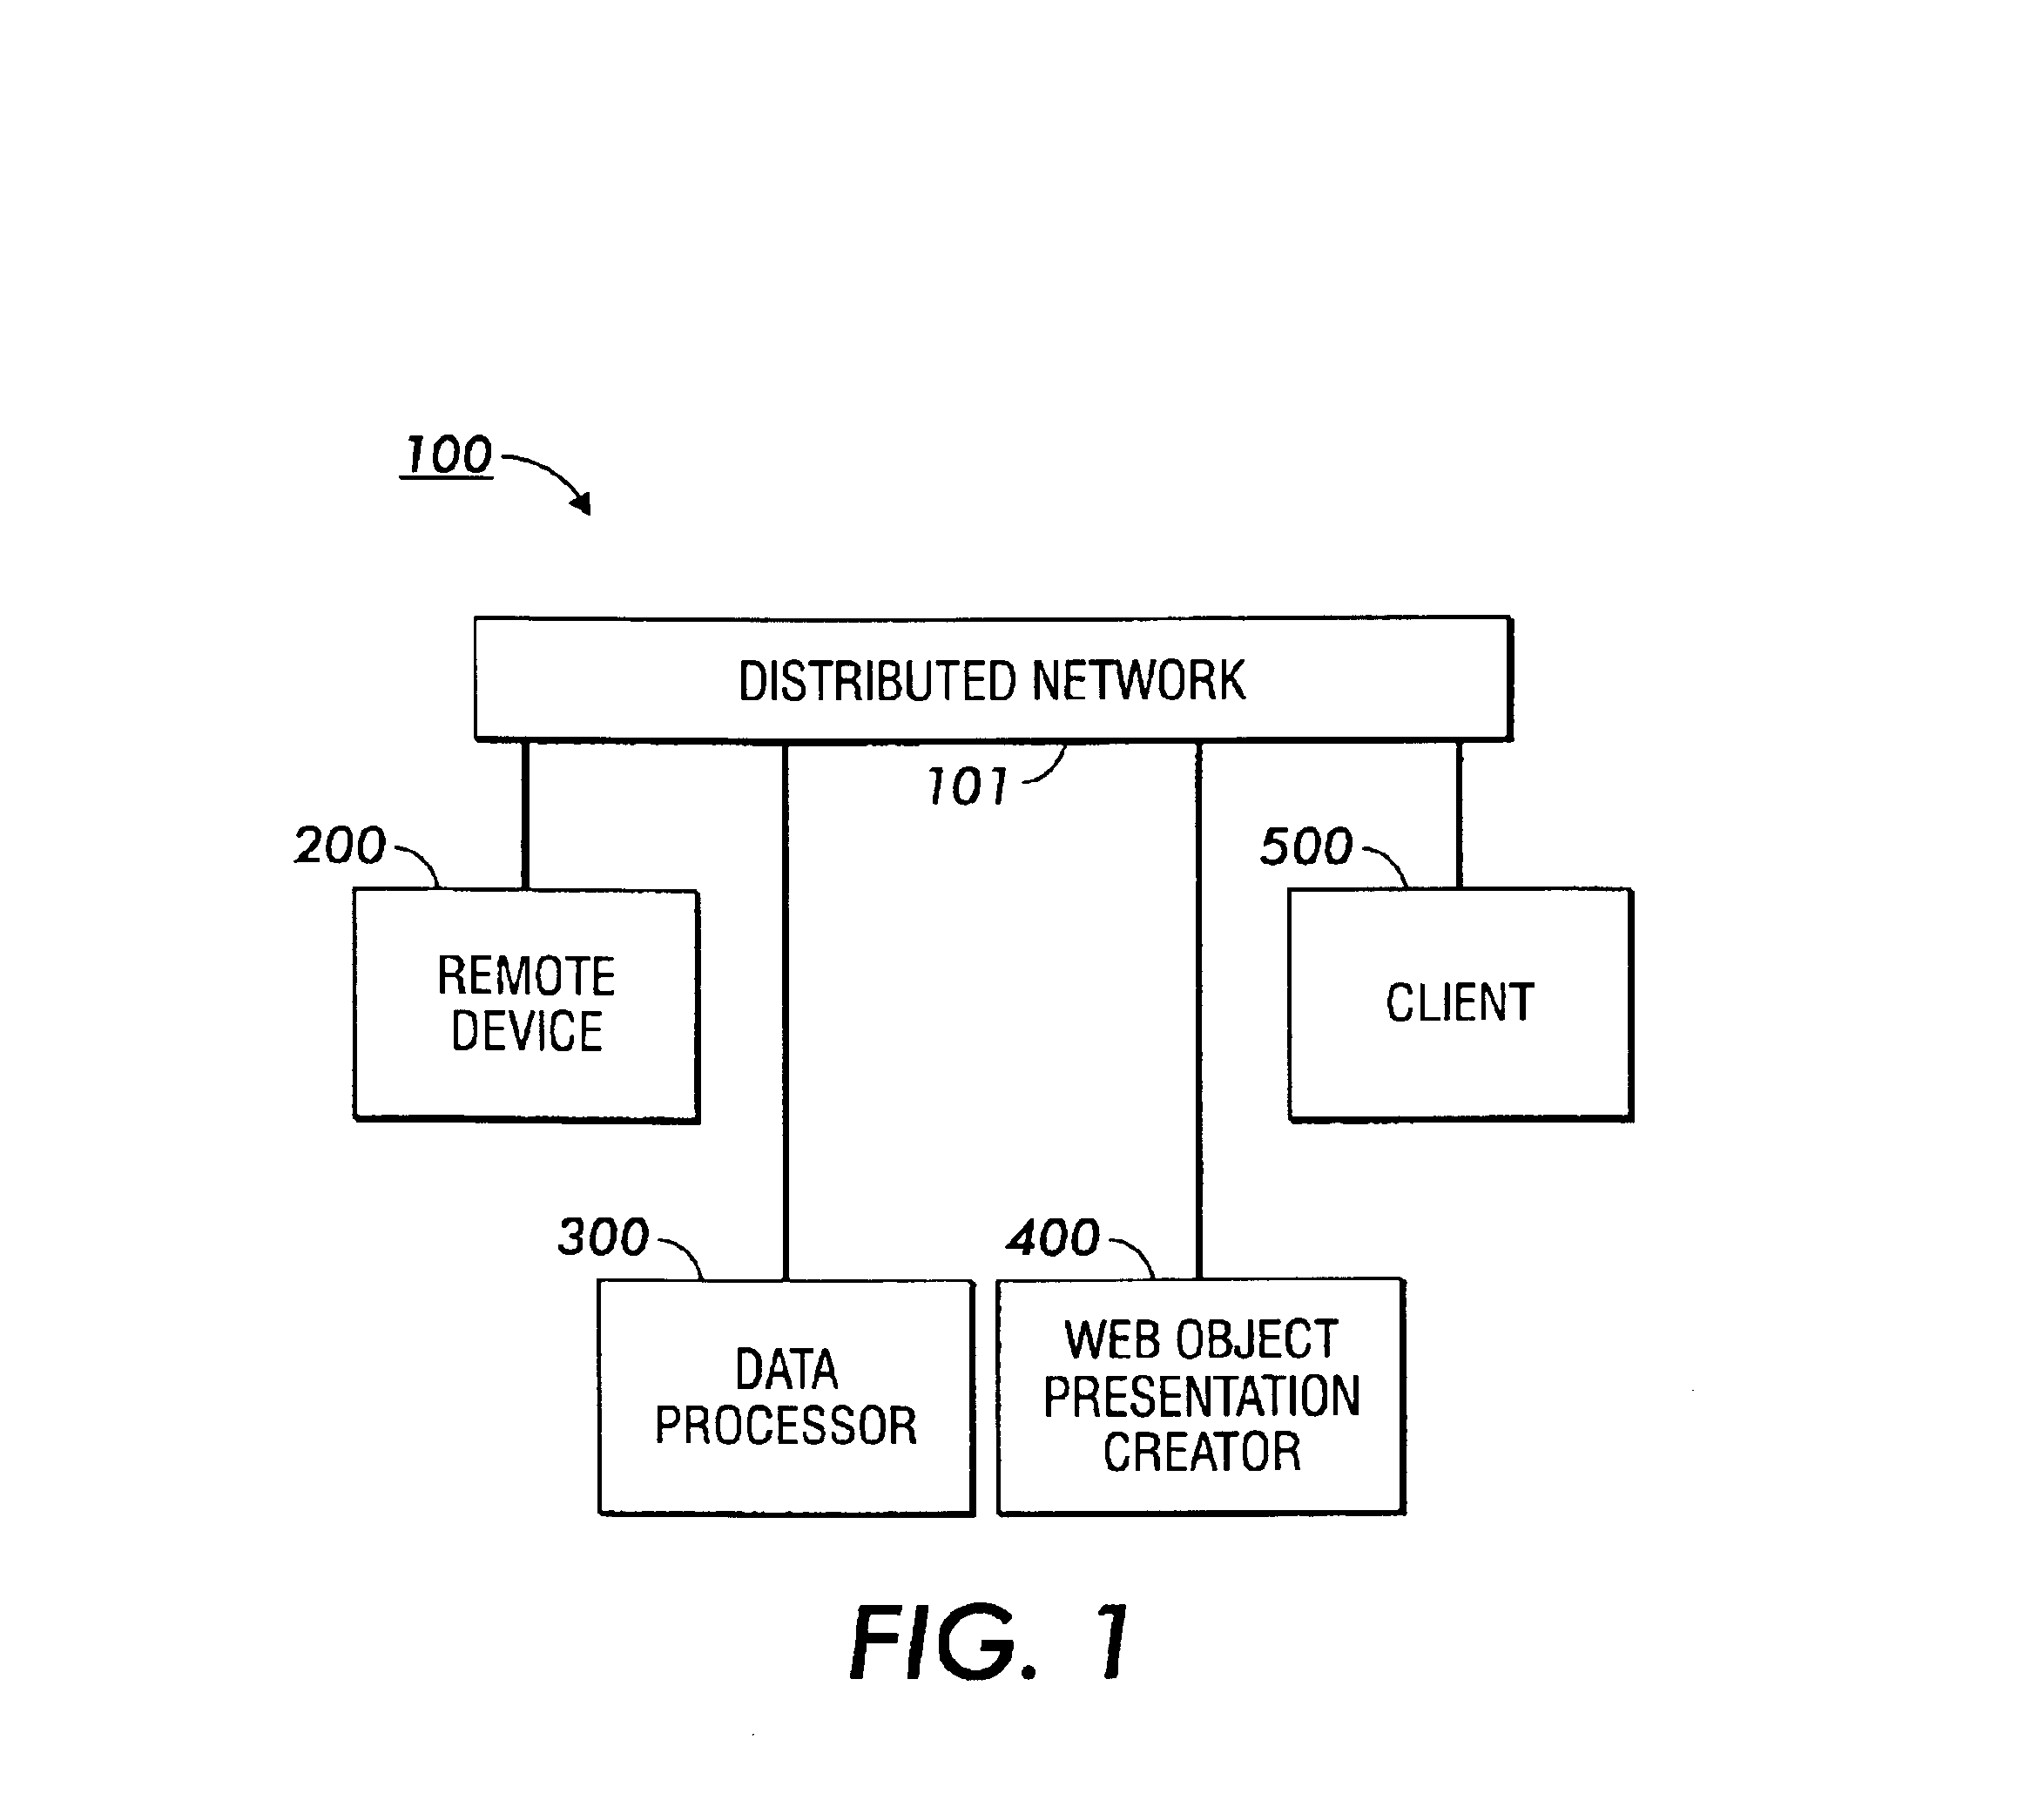 Mechanisms for web-object event/state-driven communication between networked devices